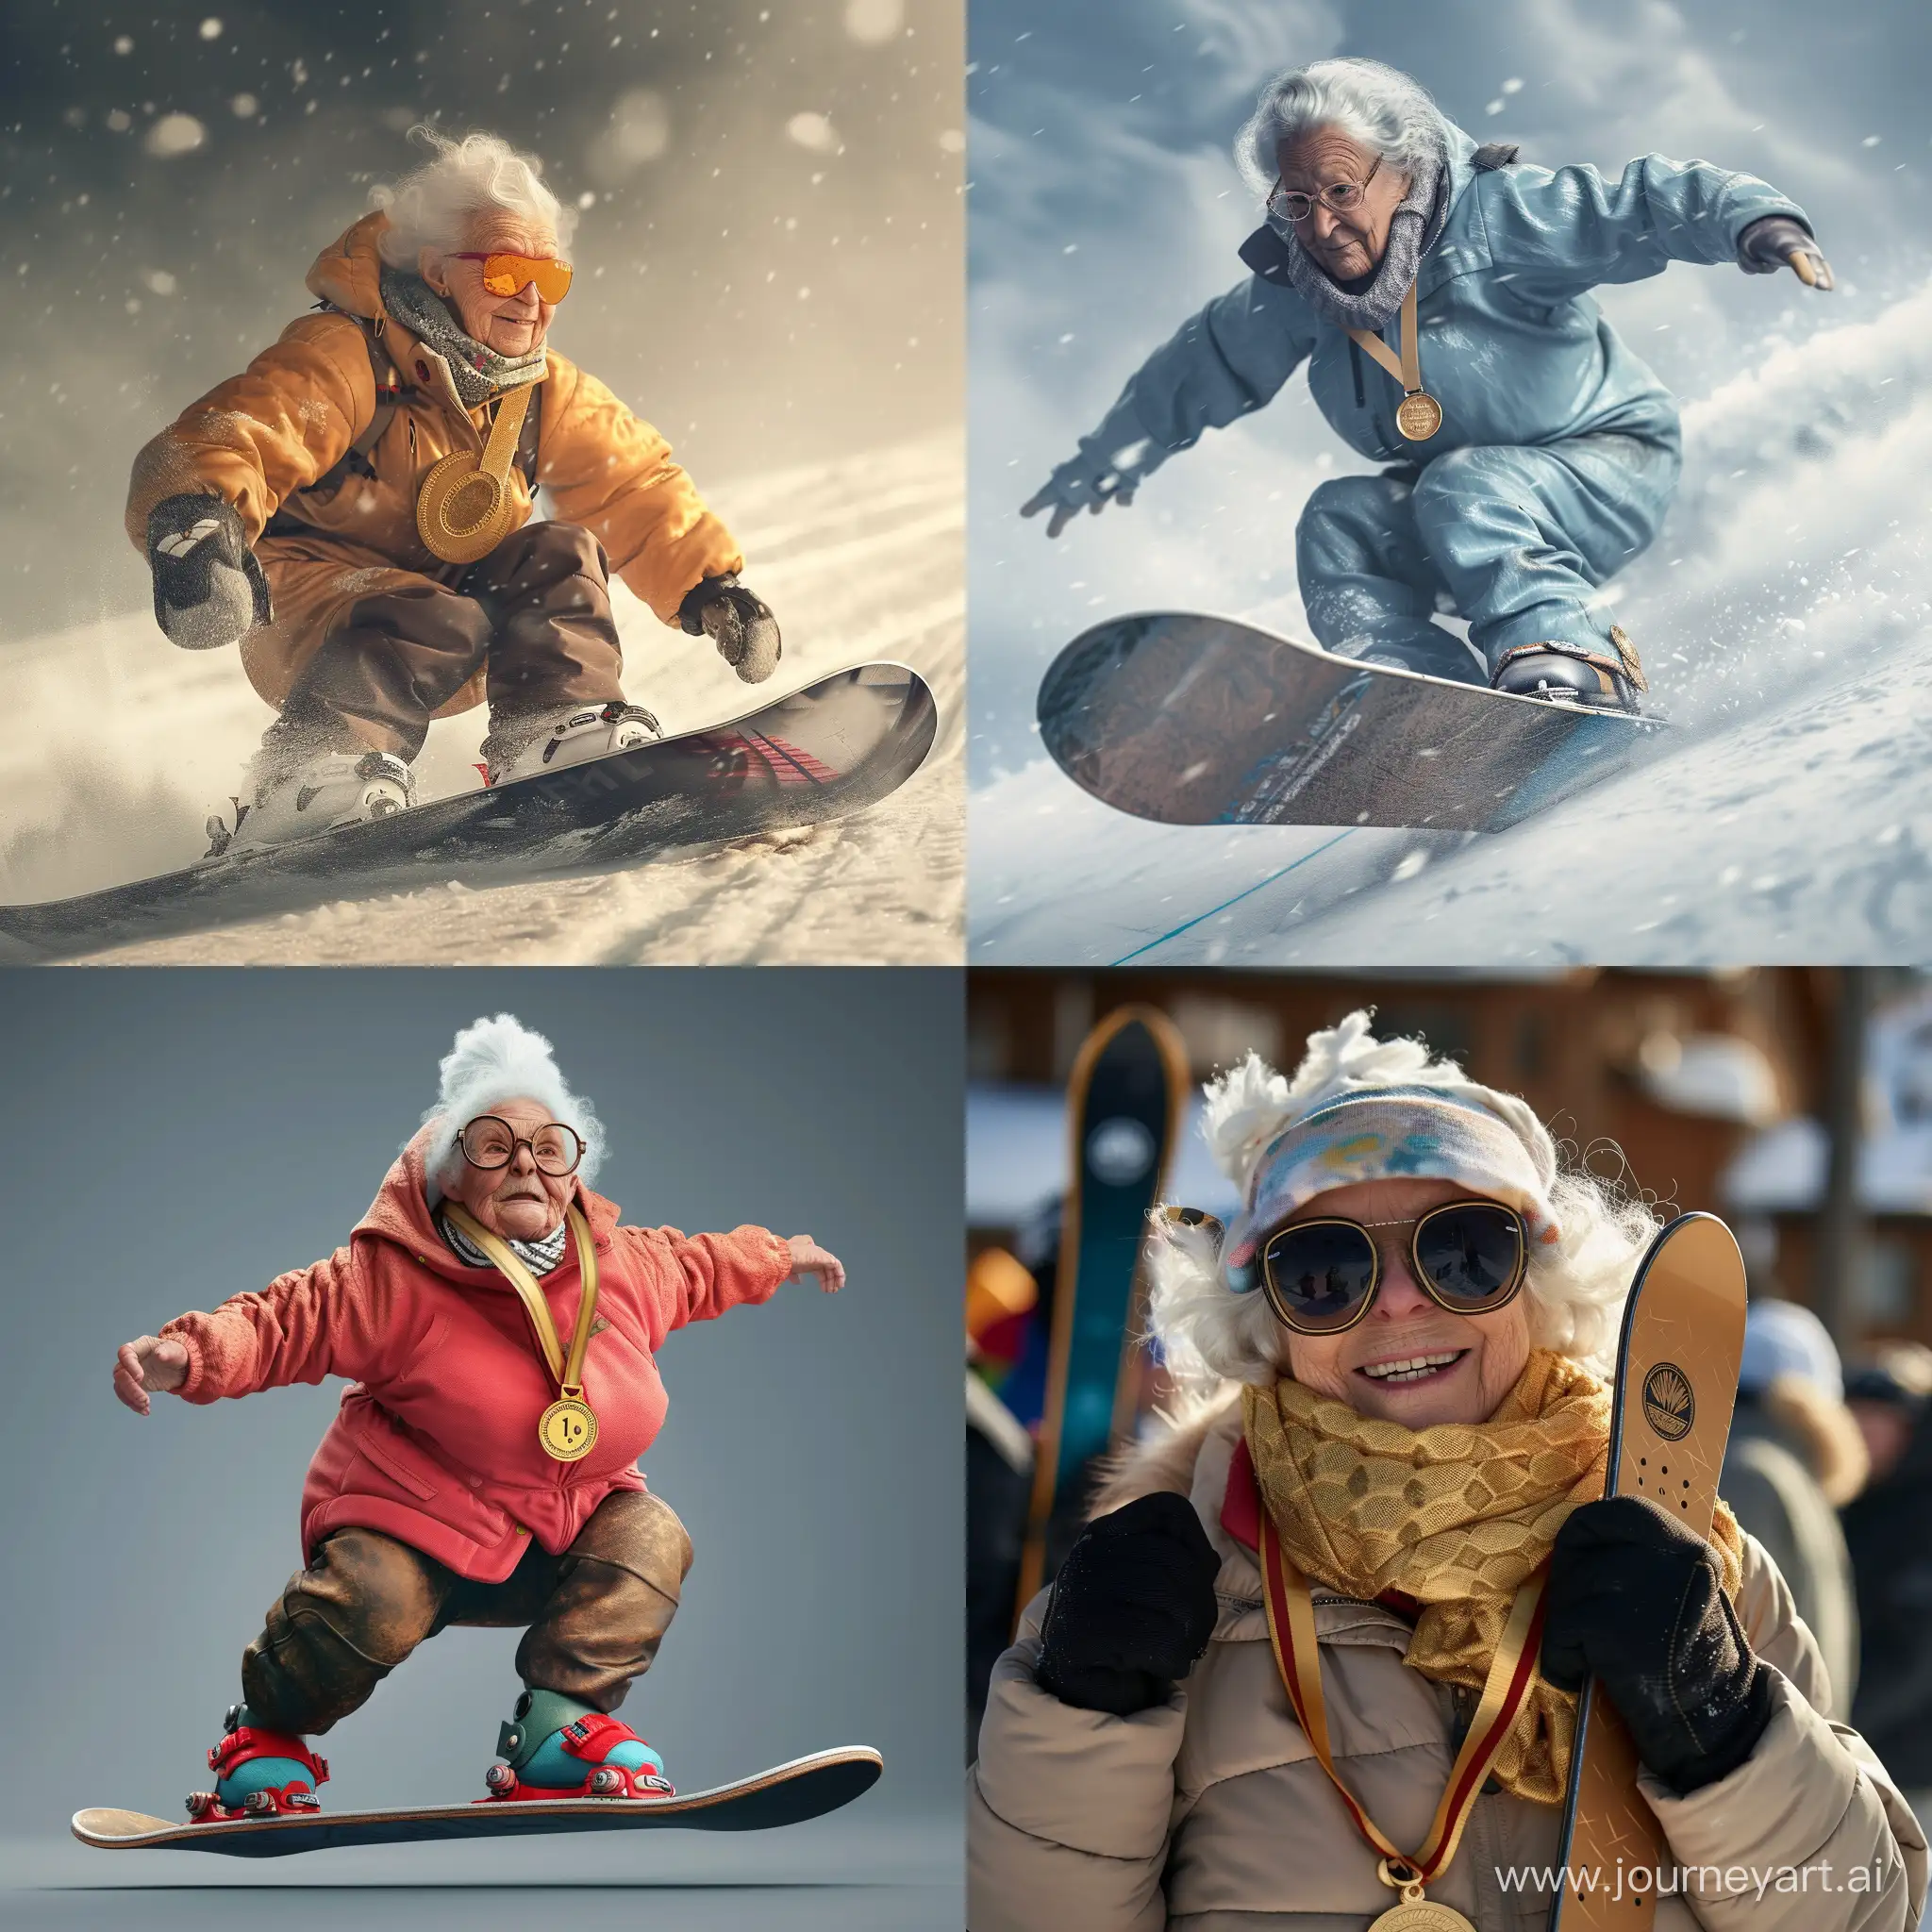 Grandma-Granny-Wins-Gold-Medal-in-Snowboarding-Competition